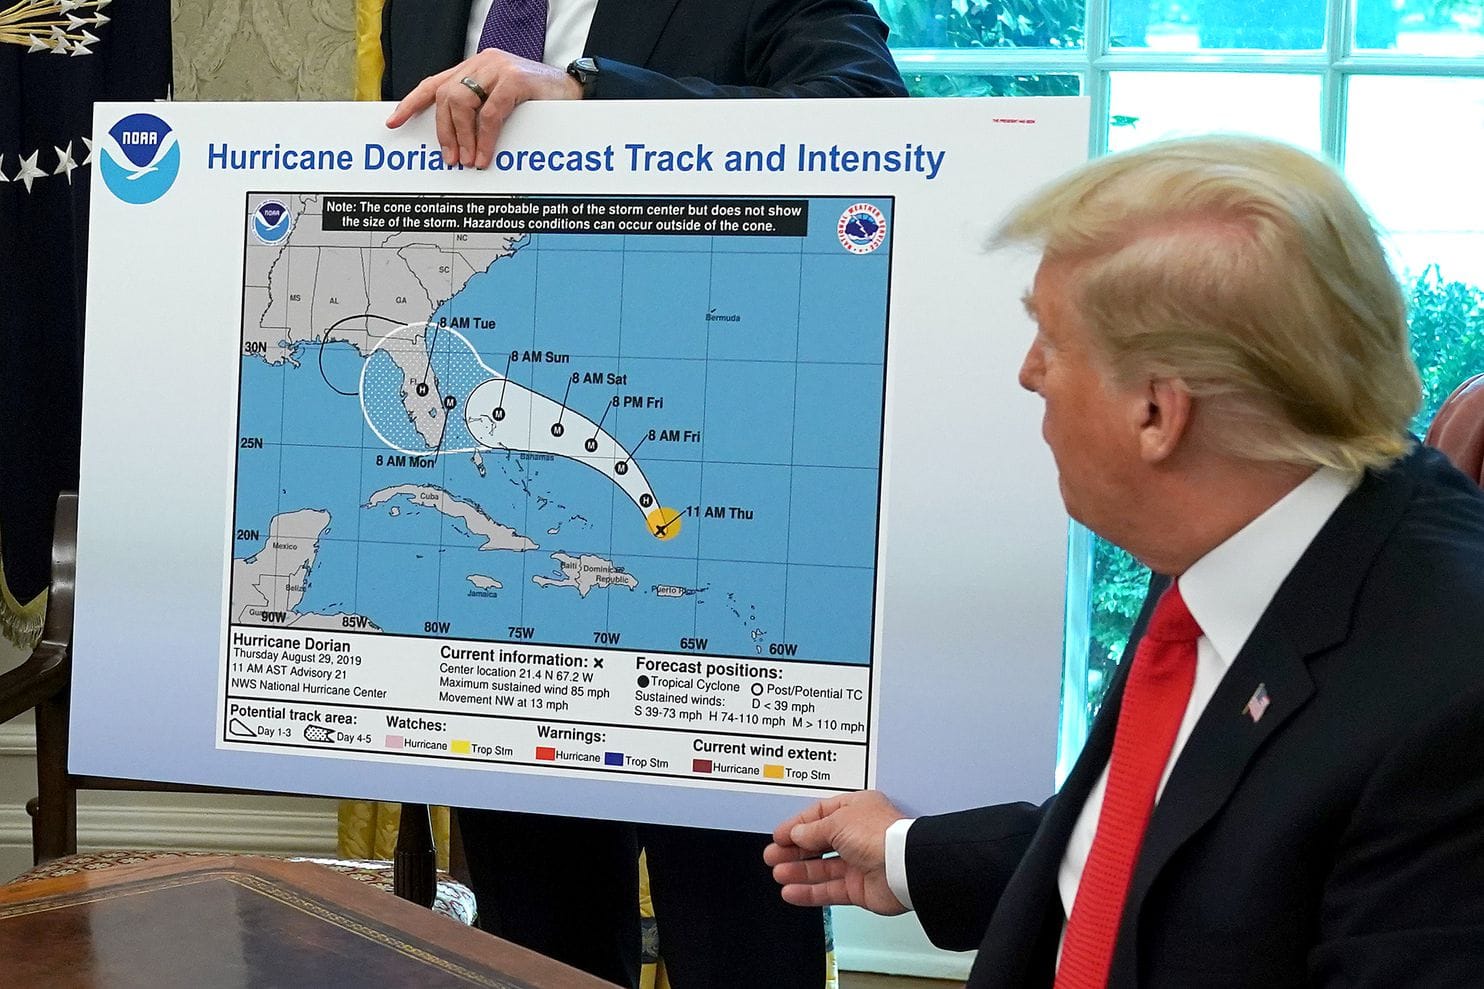 Trump refers to a map, modified using a Sharpie, while talking to reporters following a briefing from officials about Hurricane Dorian in the Oval Office at the White House on 4 September 2019. Photo: Chip Somodevilla / Getty Images